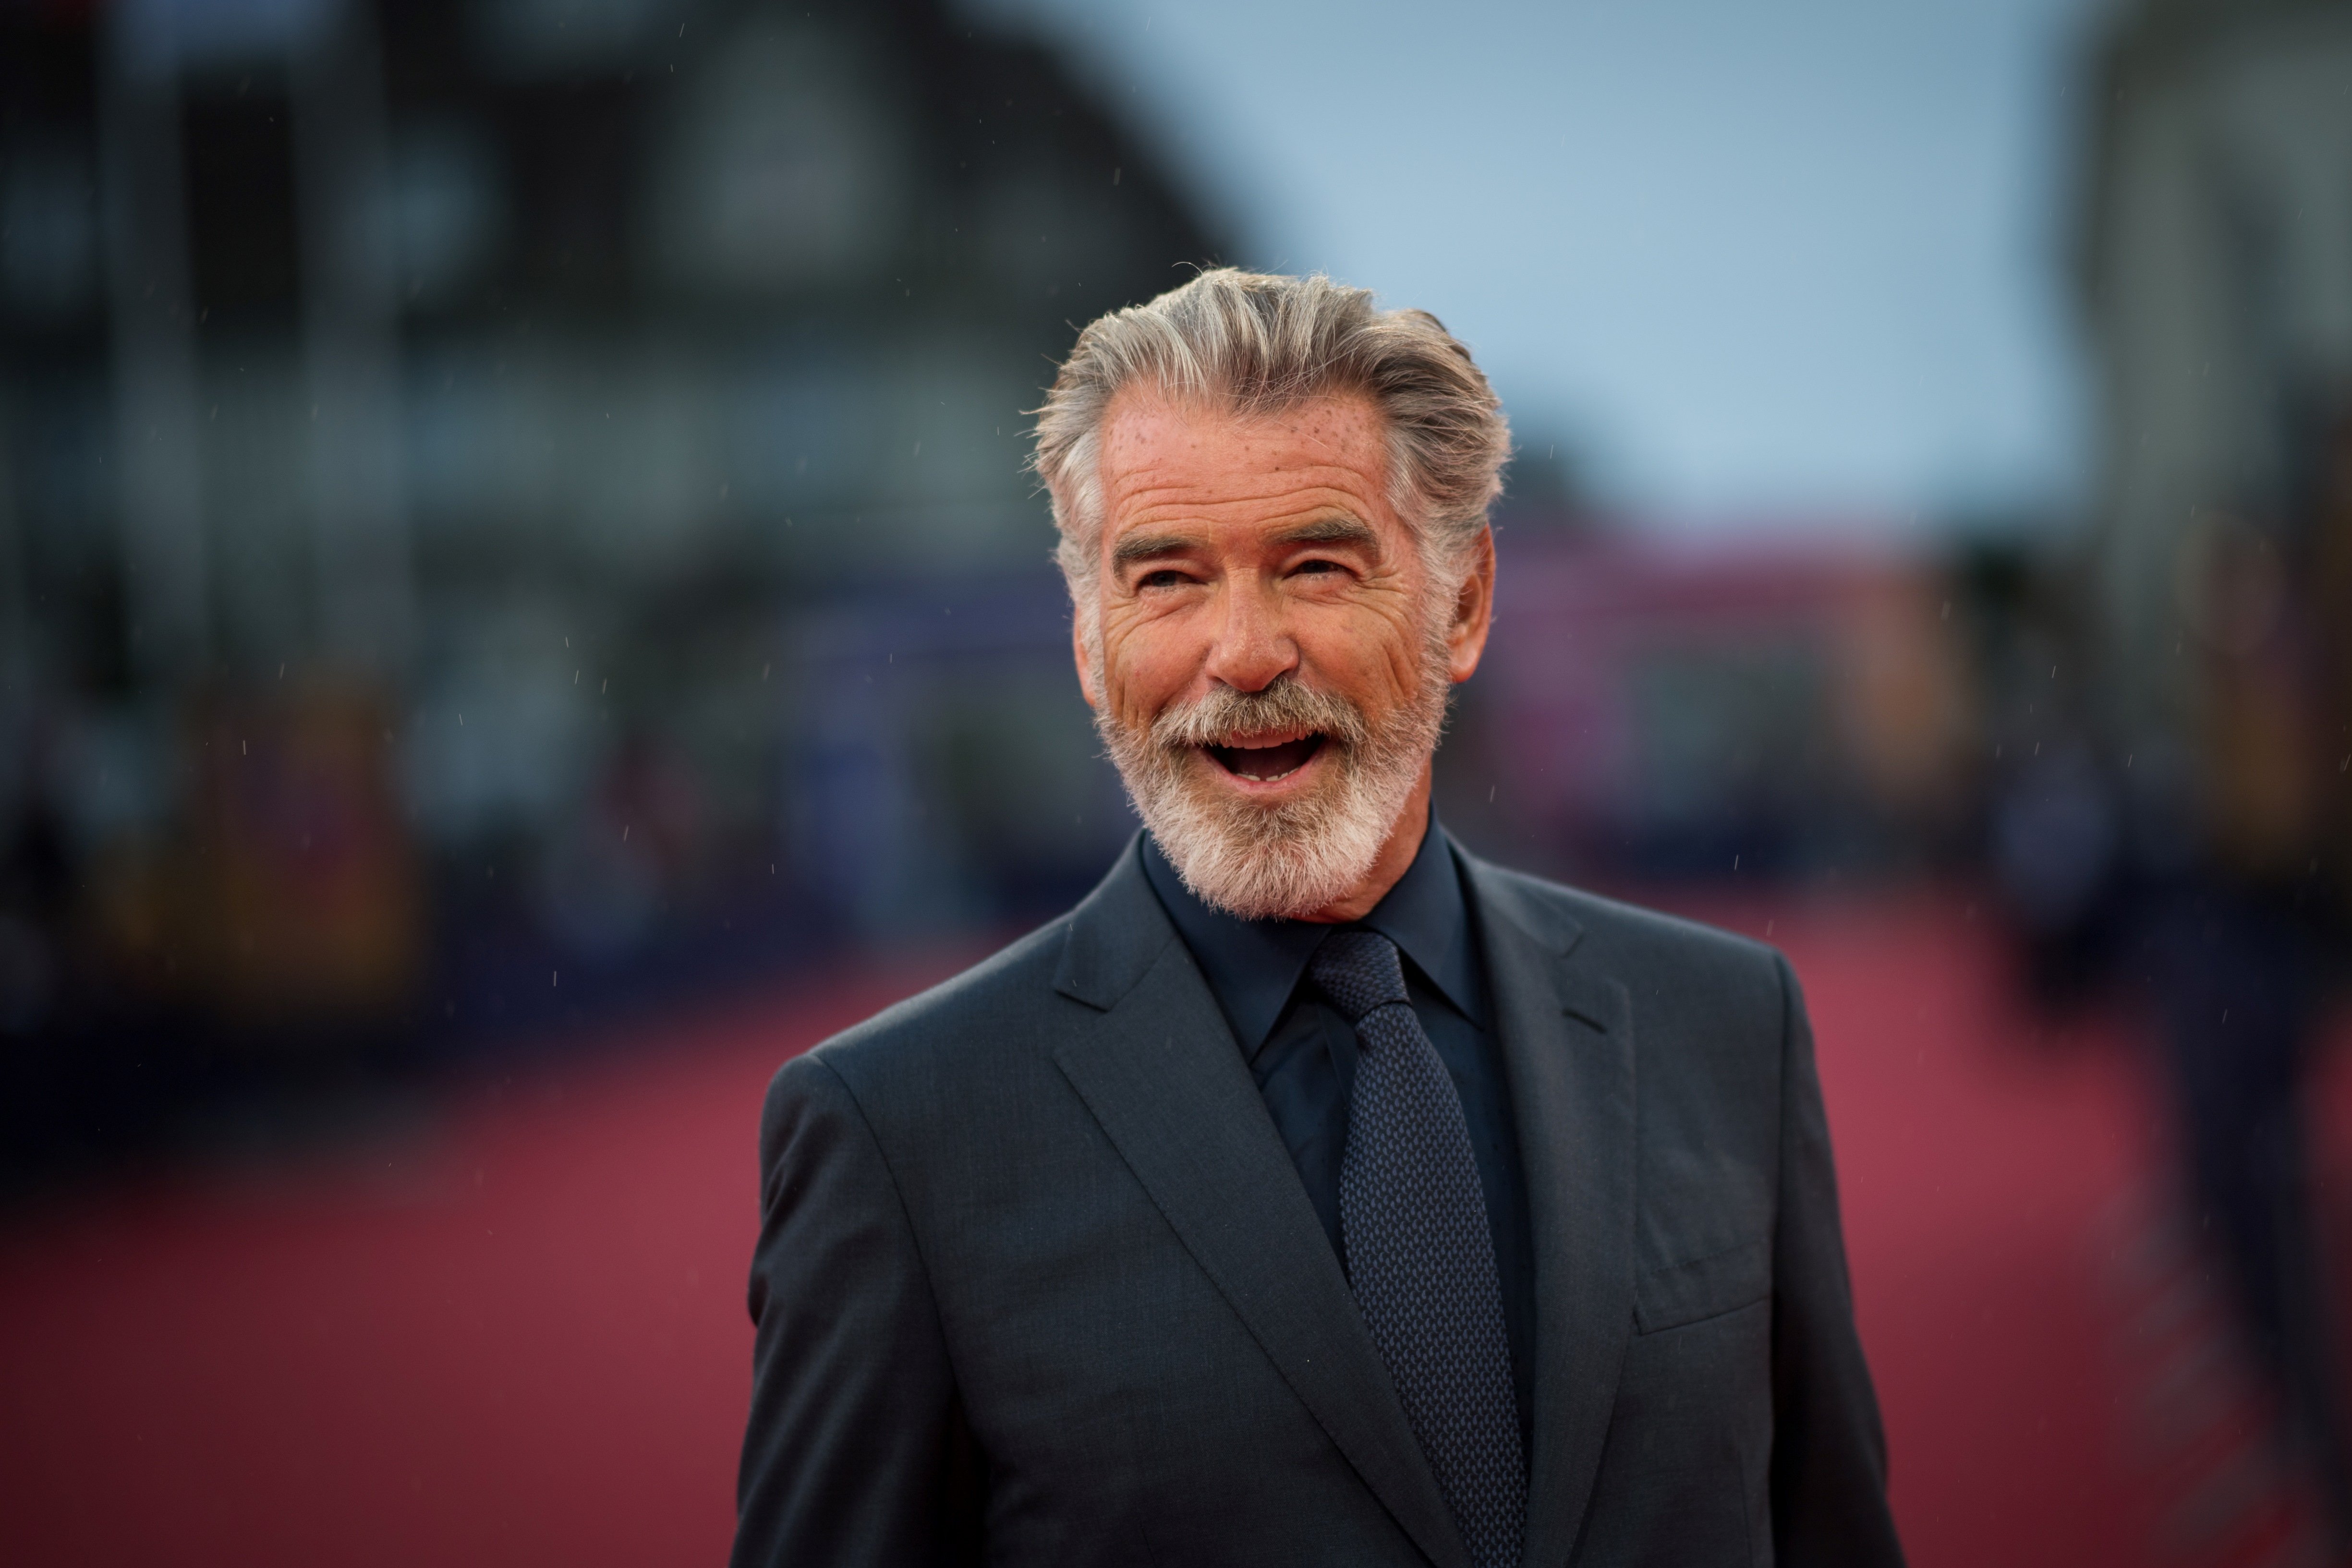 Pierce Brosnan on September 6, 2019 in Deauville | Source: Getty Images 